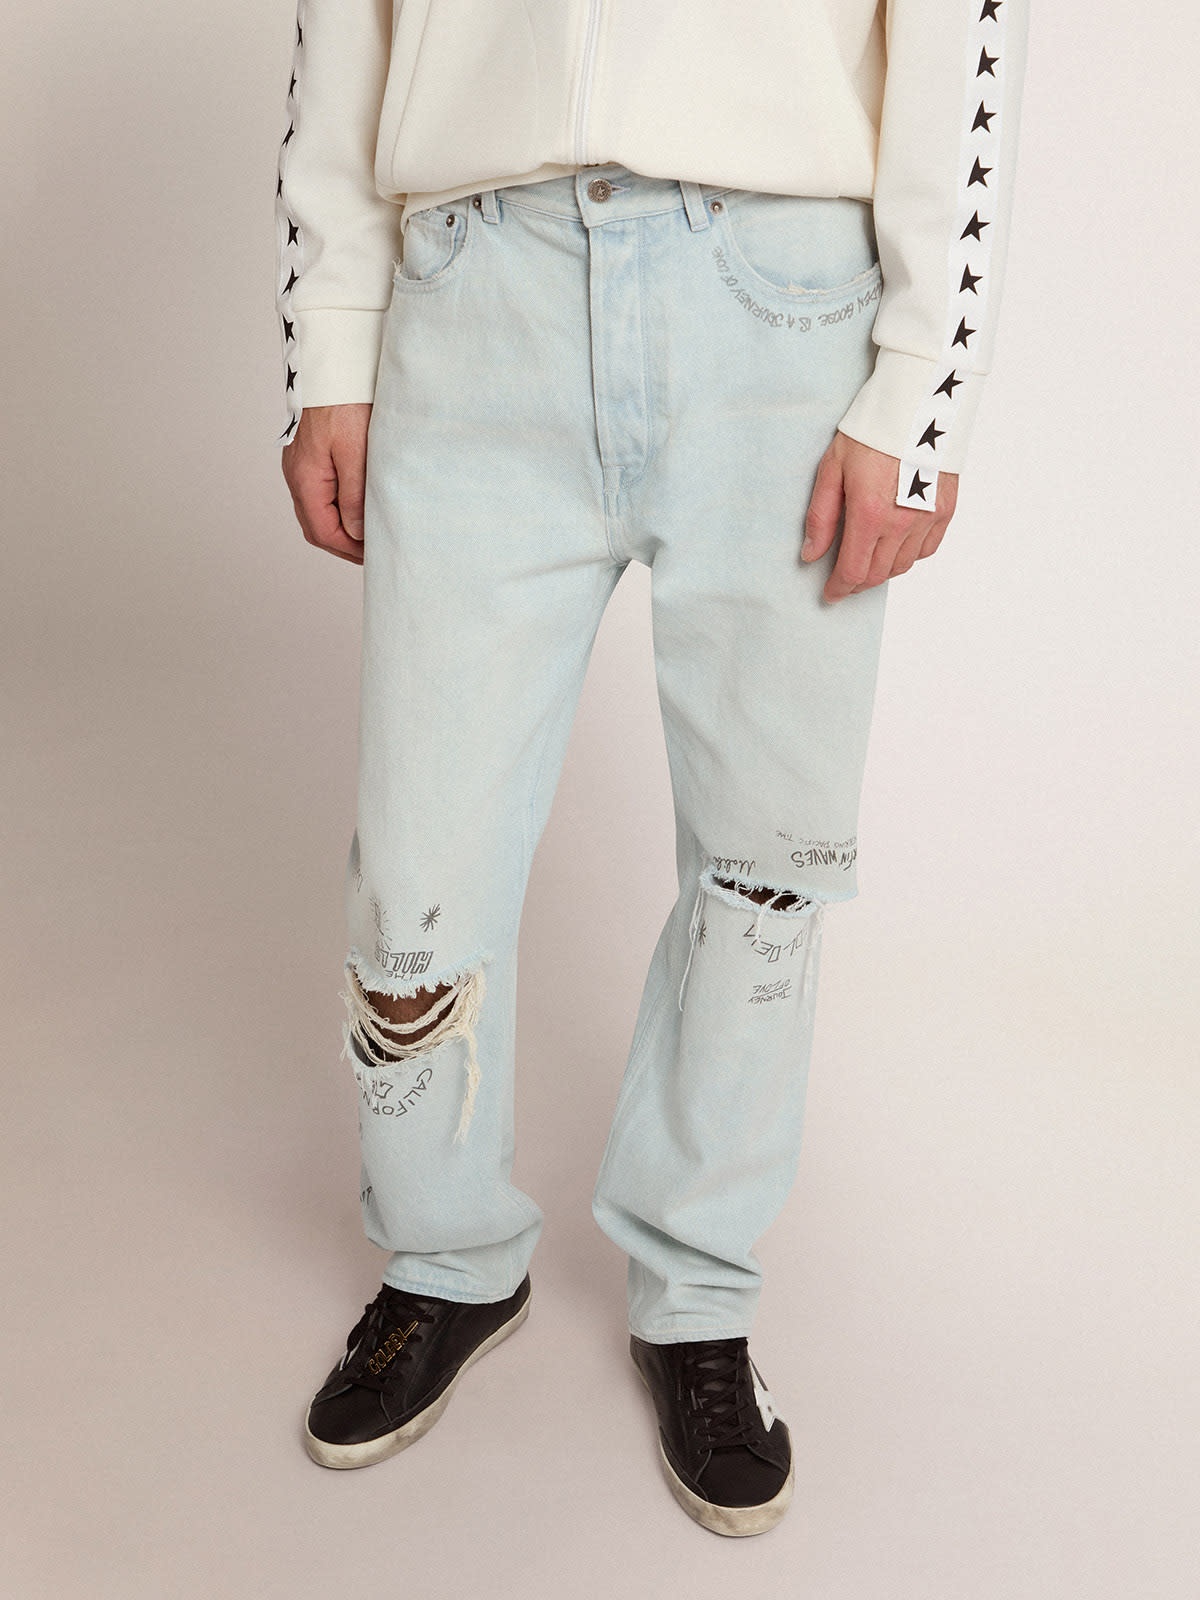 Men's bleached jeans with distressed treatment - 2